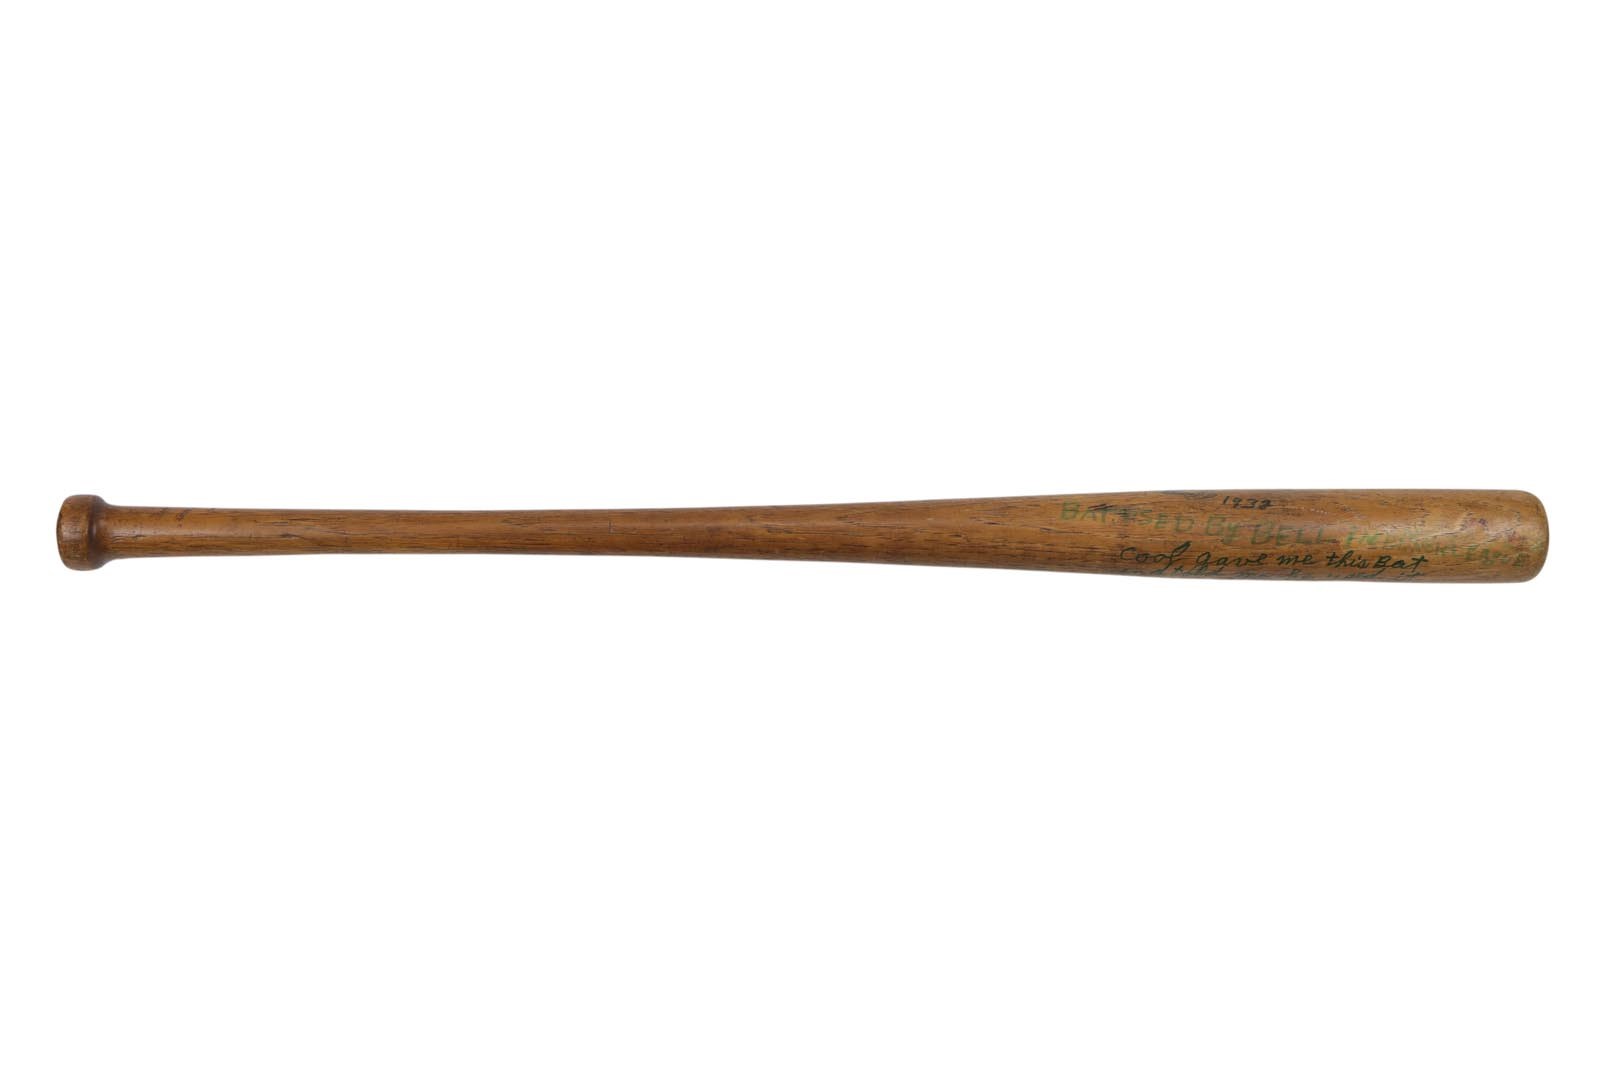 1932 James "Cool Papa" Bell Signed Game Used Bat - Gifted to Lester Lockett (PSA GU 7)